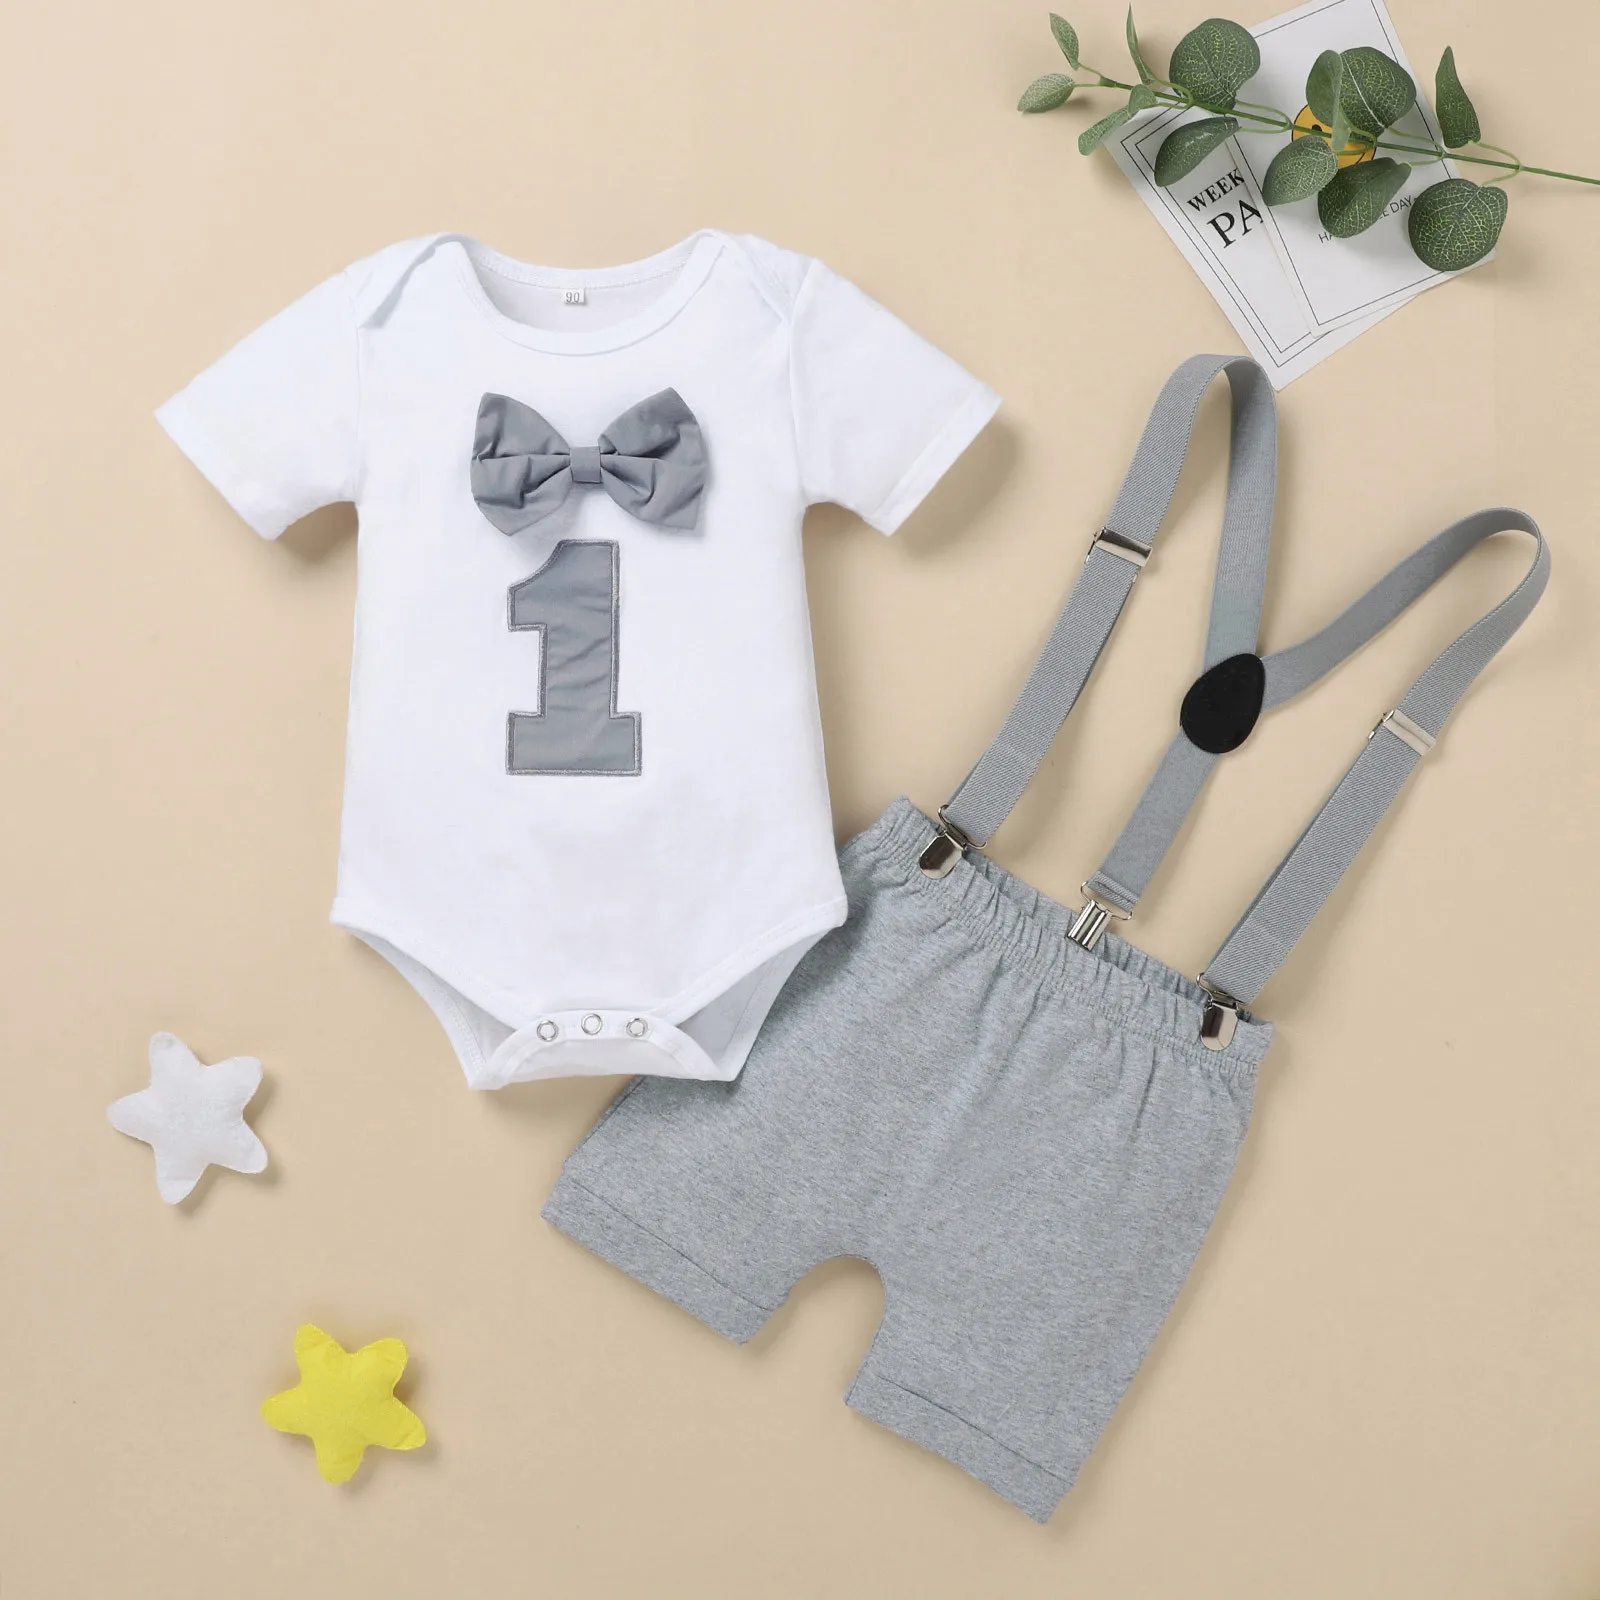 

Baby Boy Clothing One Year Infant Baby Boy Bow Tie Romper Bodysuit Funny First Birthday Clothes Outfits Set Baby Kleding Jongen